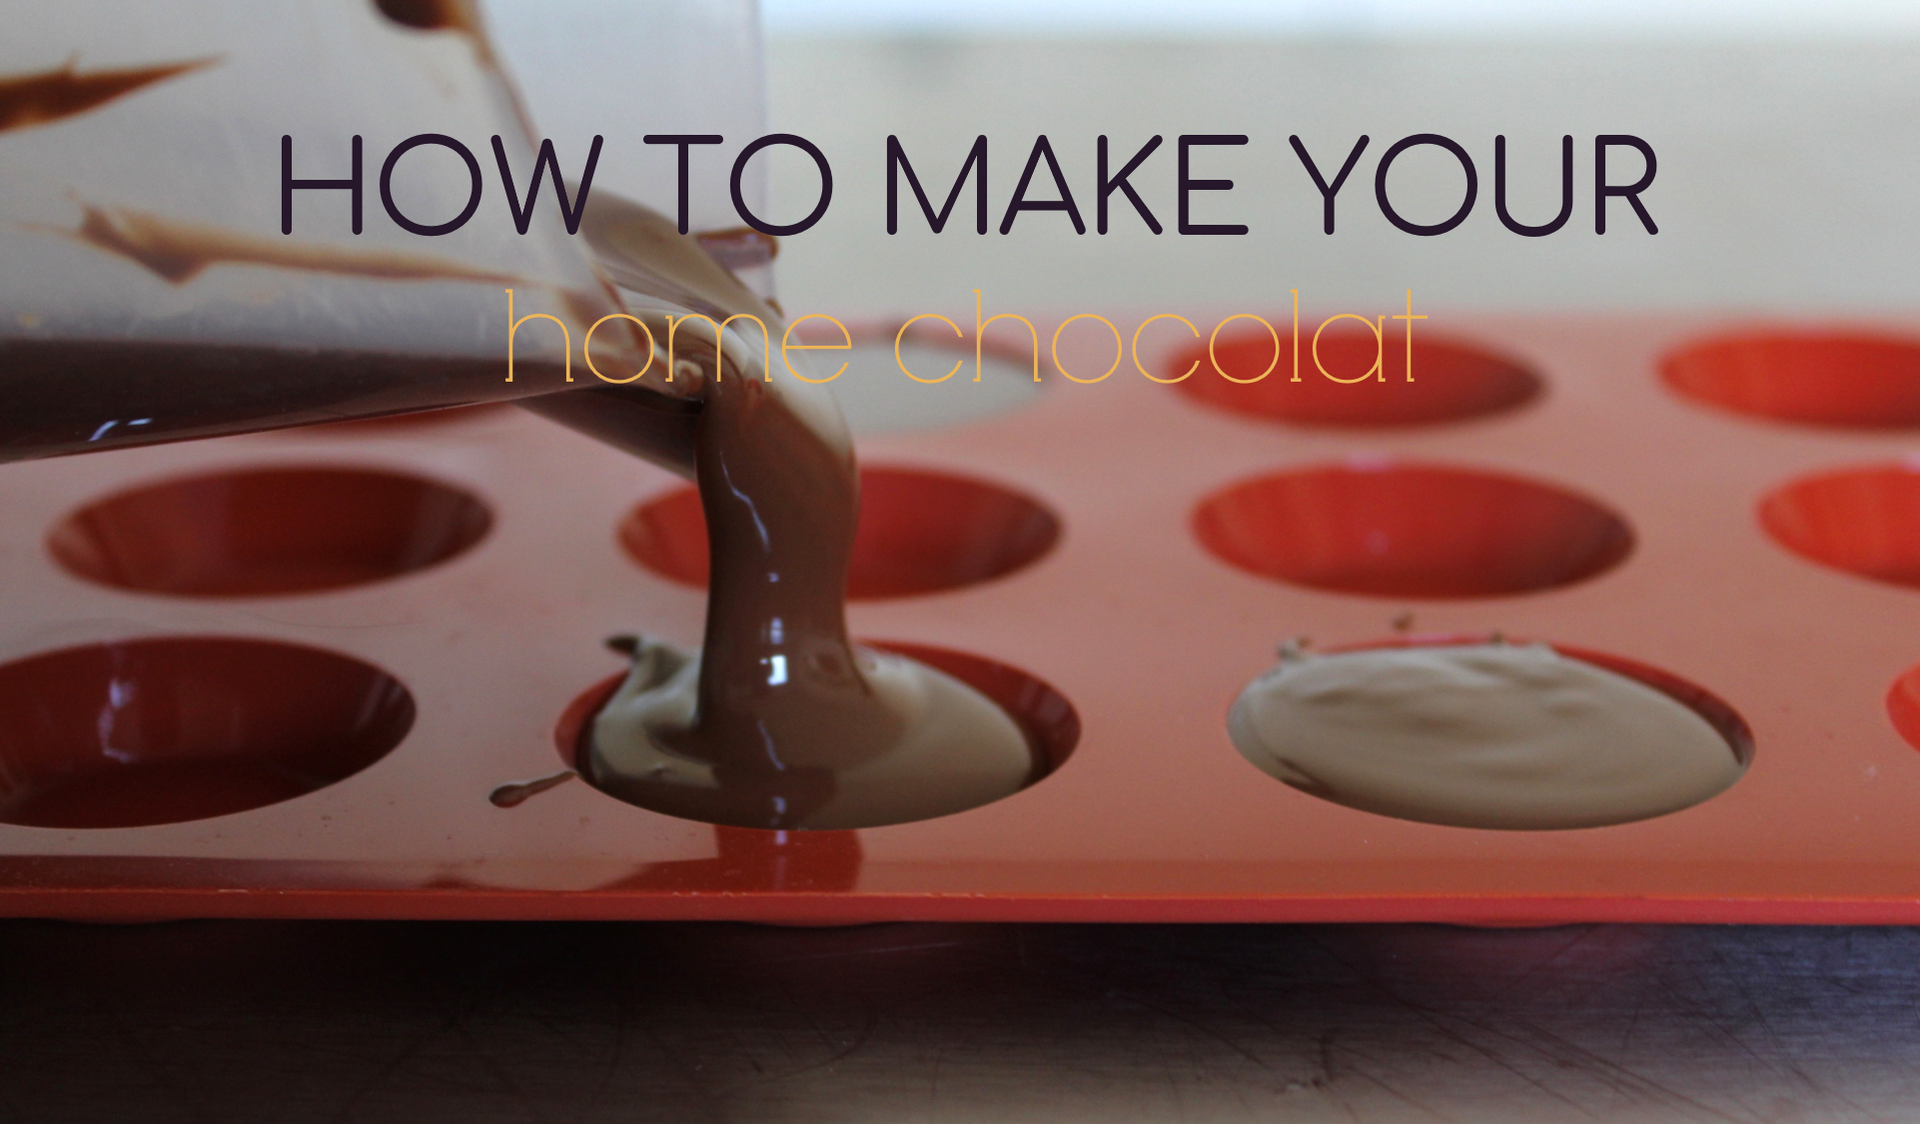 Load video: How to prepare homemade chocolate with Home Chocolat&#39;s DIY Chocolate Kit